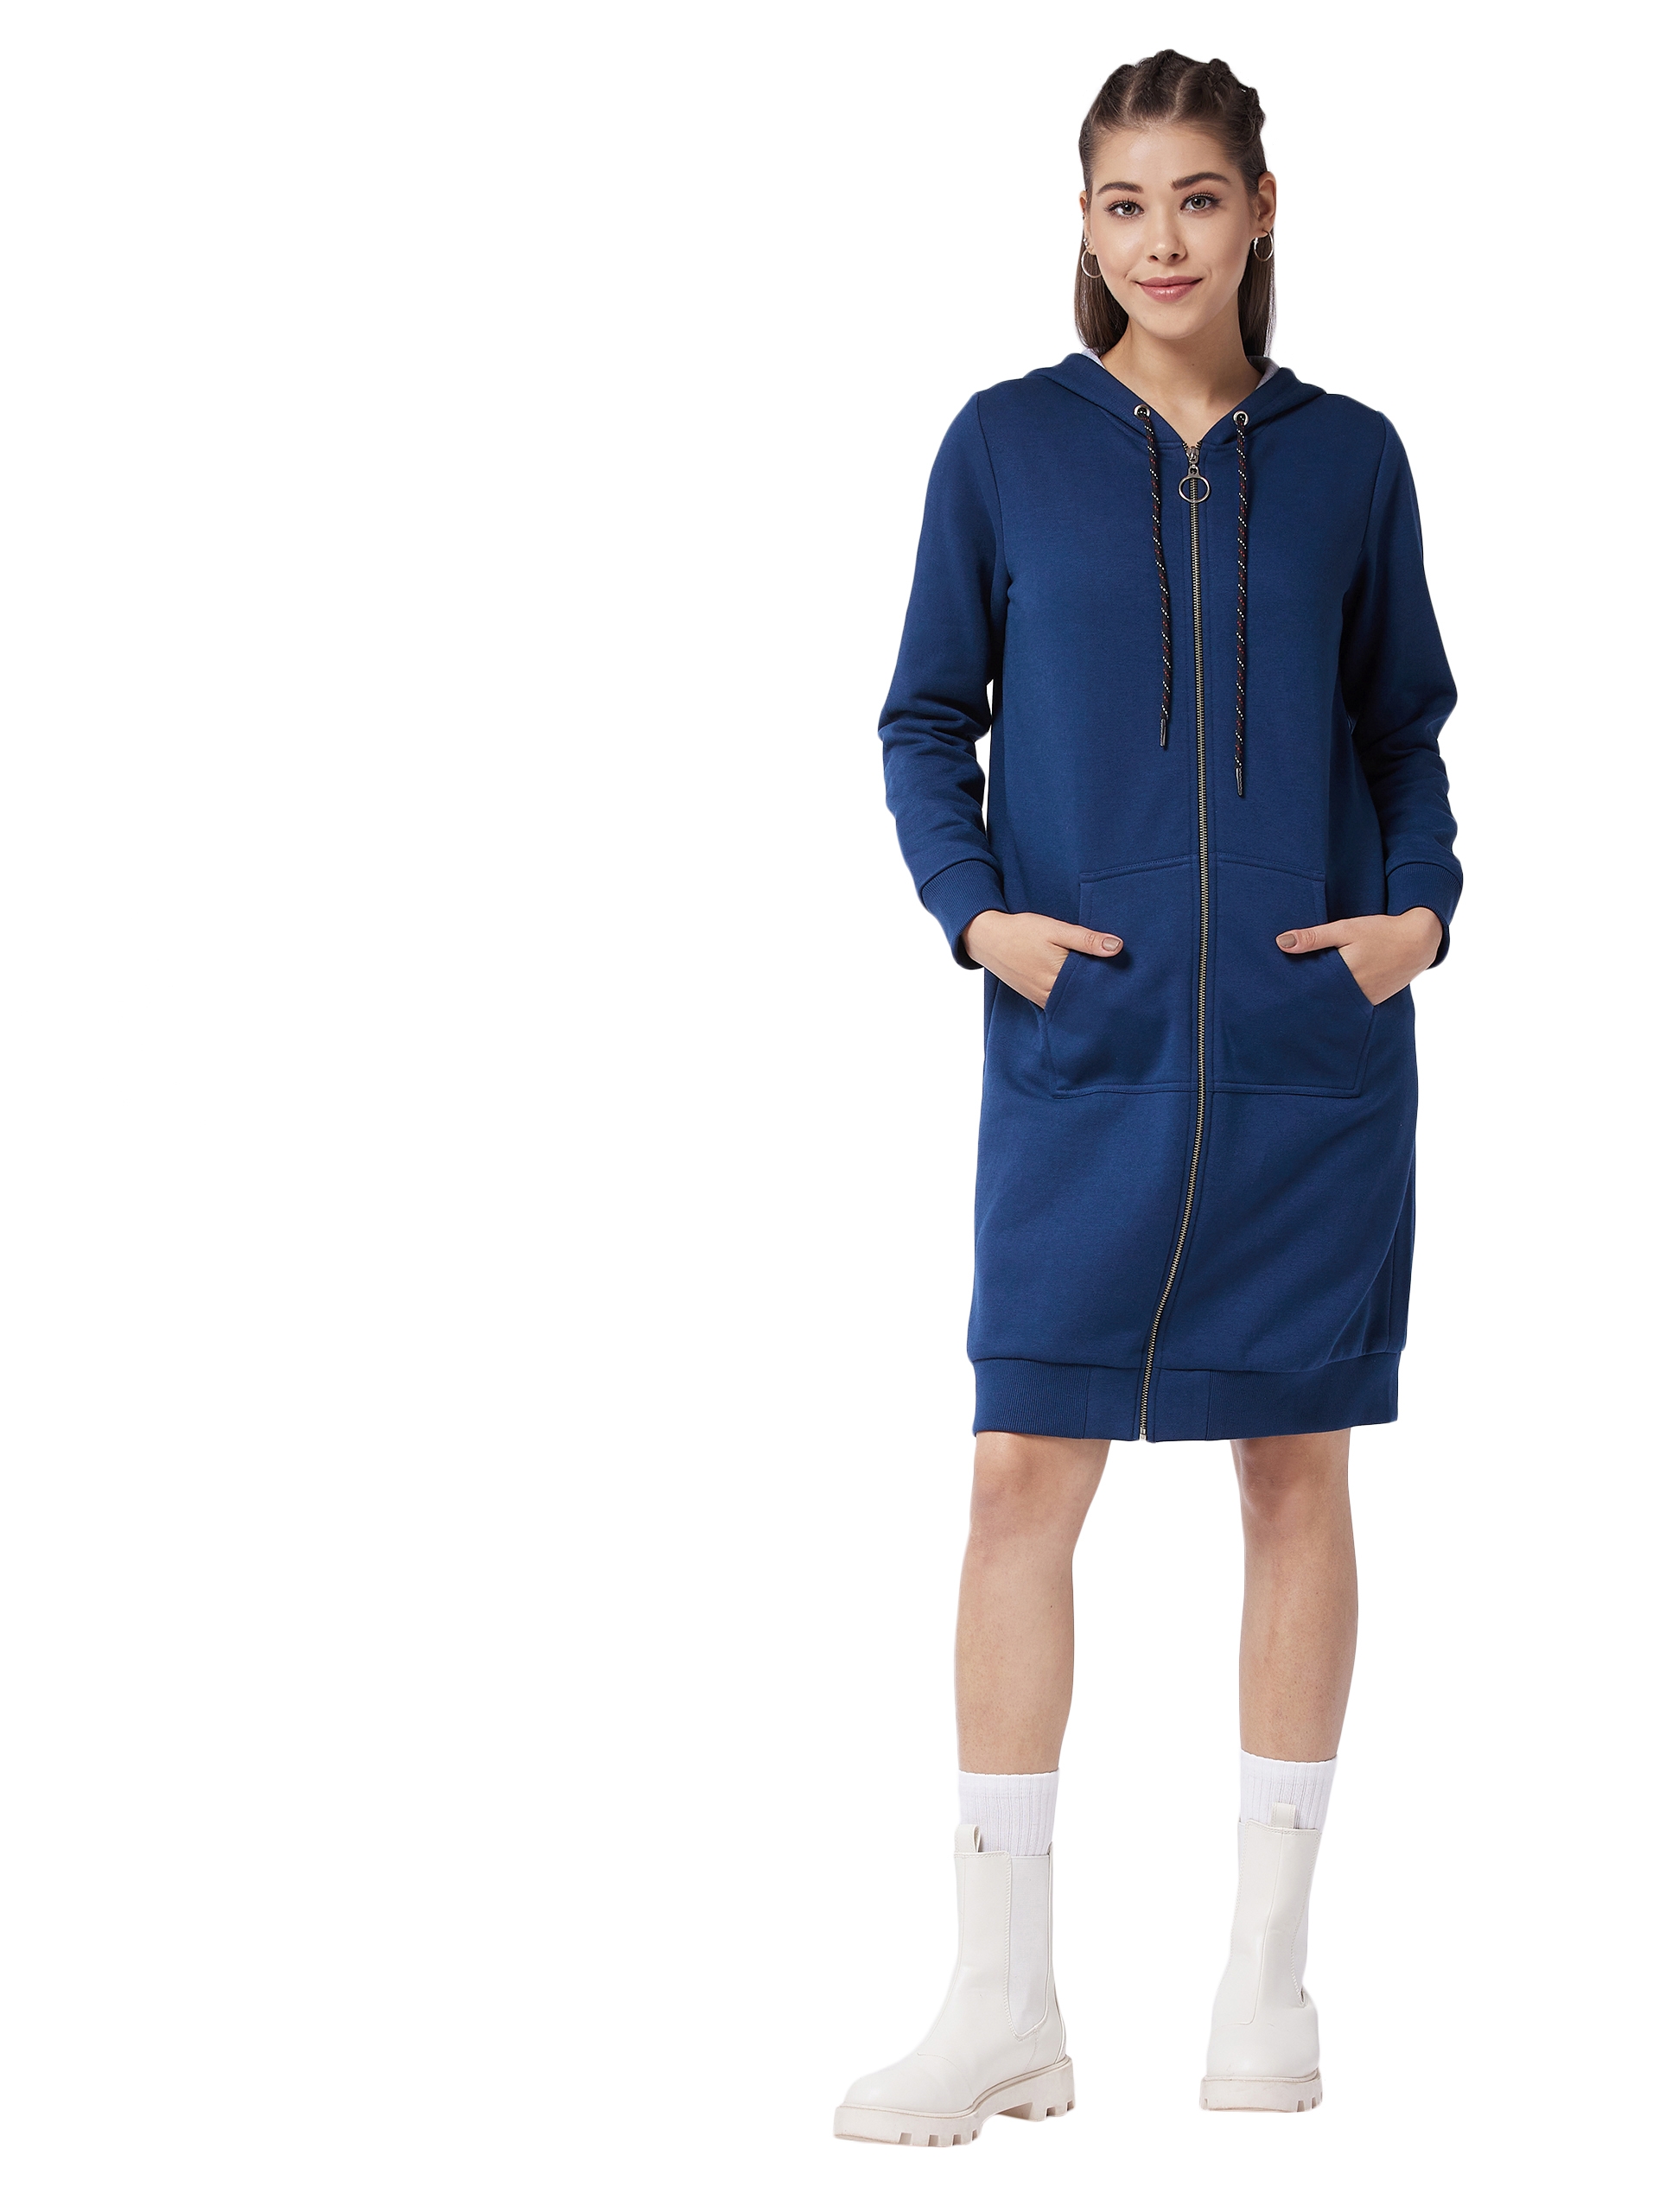 MISS CHASE |  Navy Blue Hooded Full Sleeve Solid Knee Length Dress